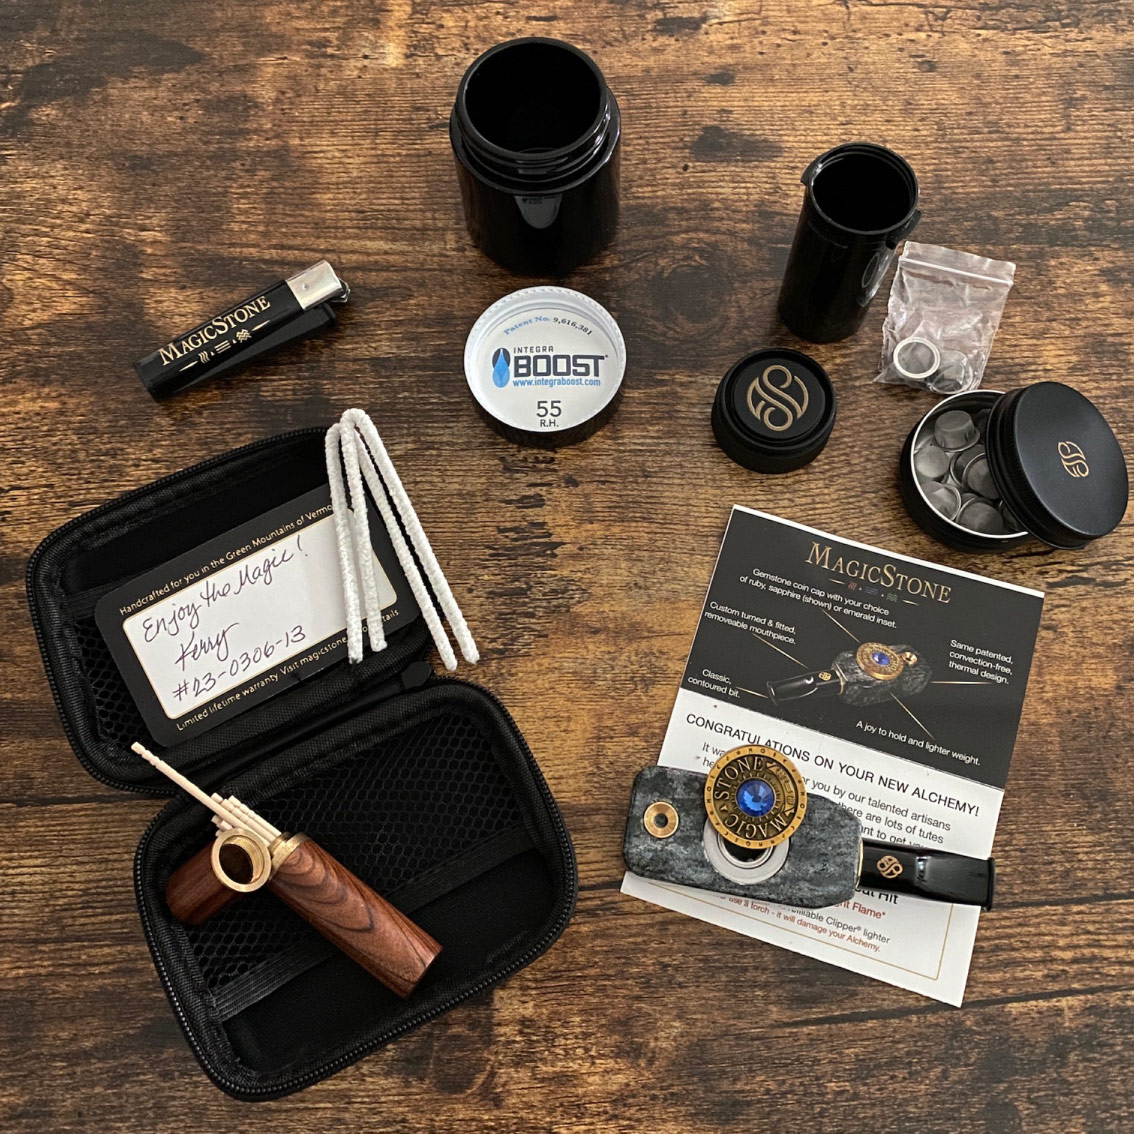 MagicStone Alchemy Elemental Kit packed with Alchemy heat-don't-burn cannabis device and essential accessories. Pick/stash case, extra basket screens and custom lighter